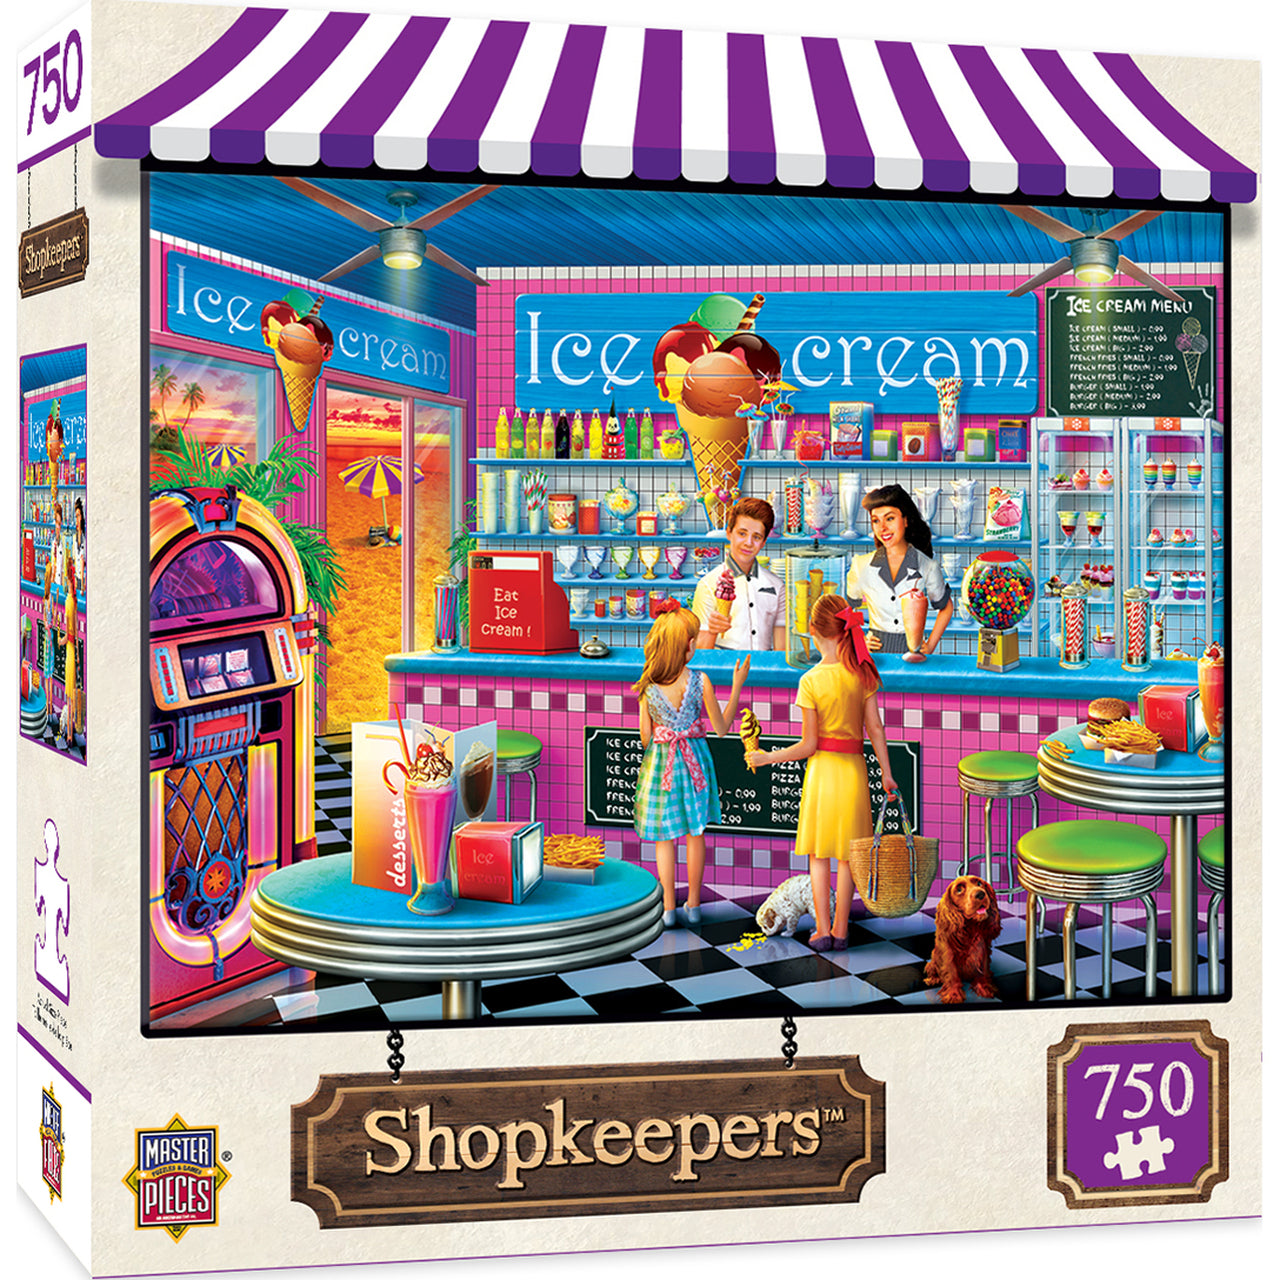 Shopkeepers Anna's Ice Cream Parlor 750 Piece Jigsaw Puzzle by Masterpieces